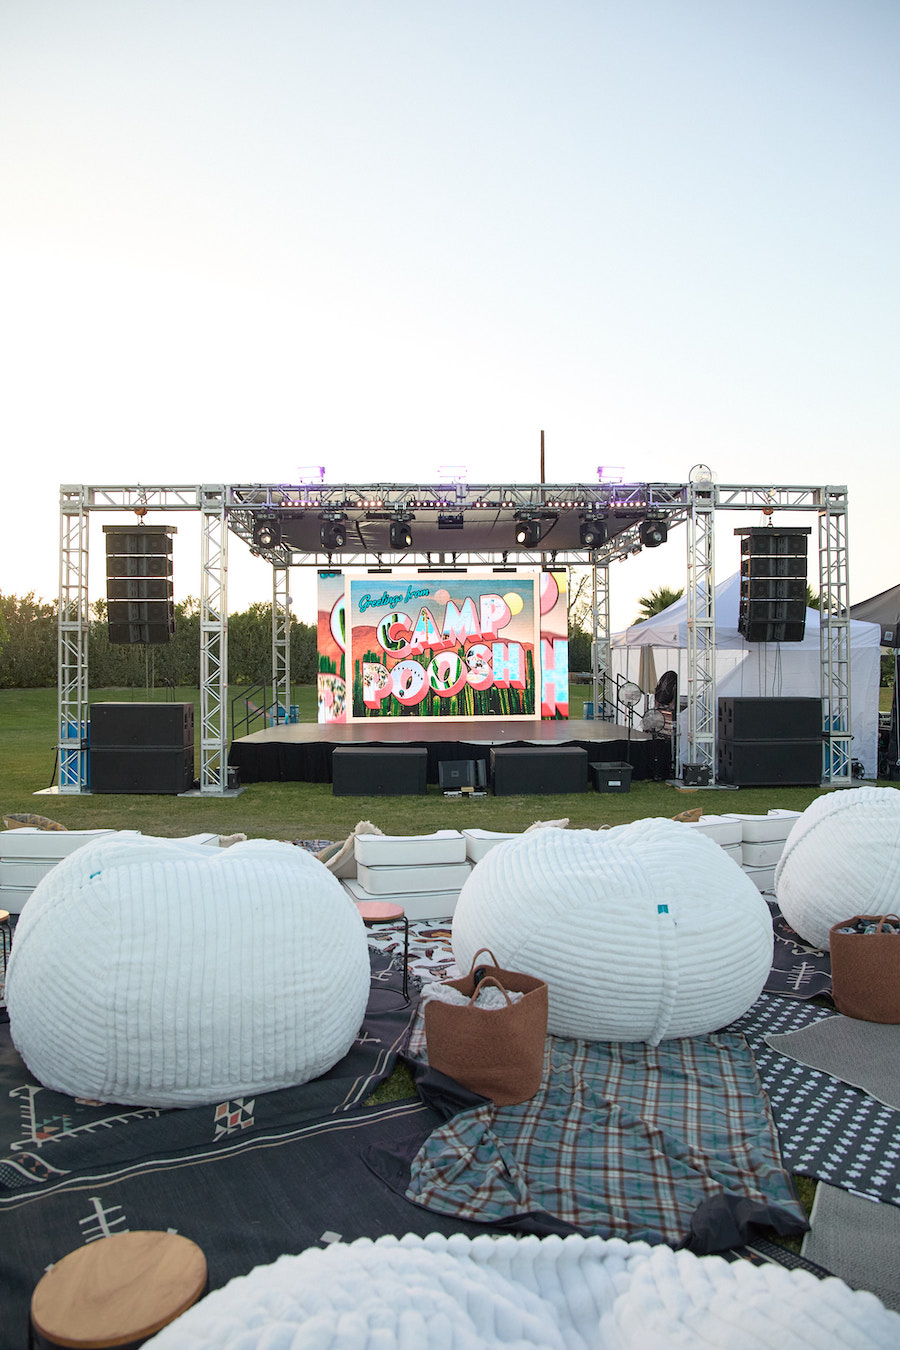 View of the outdoor movie screen